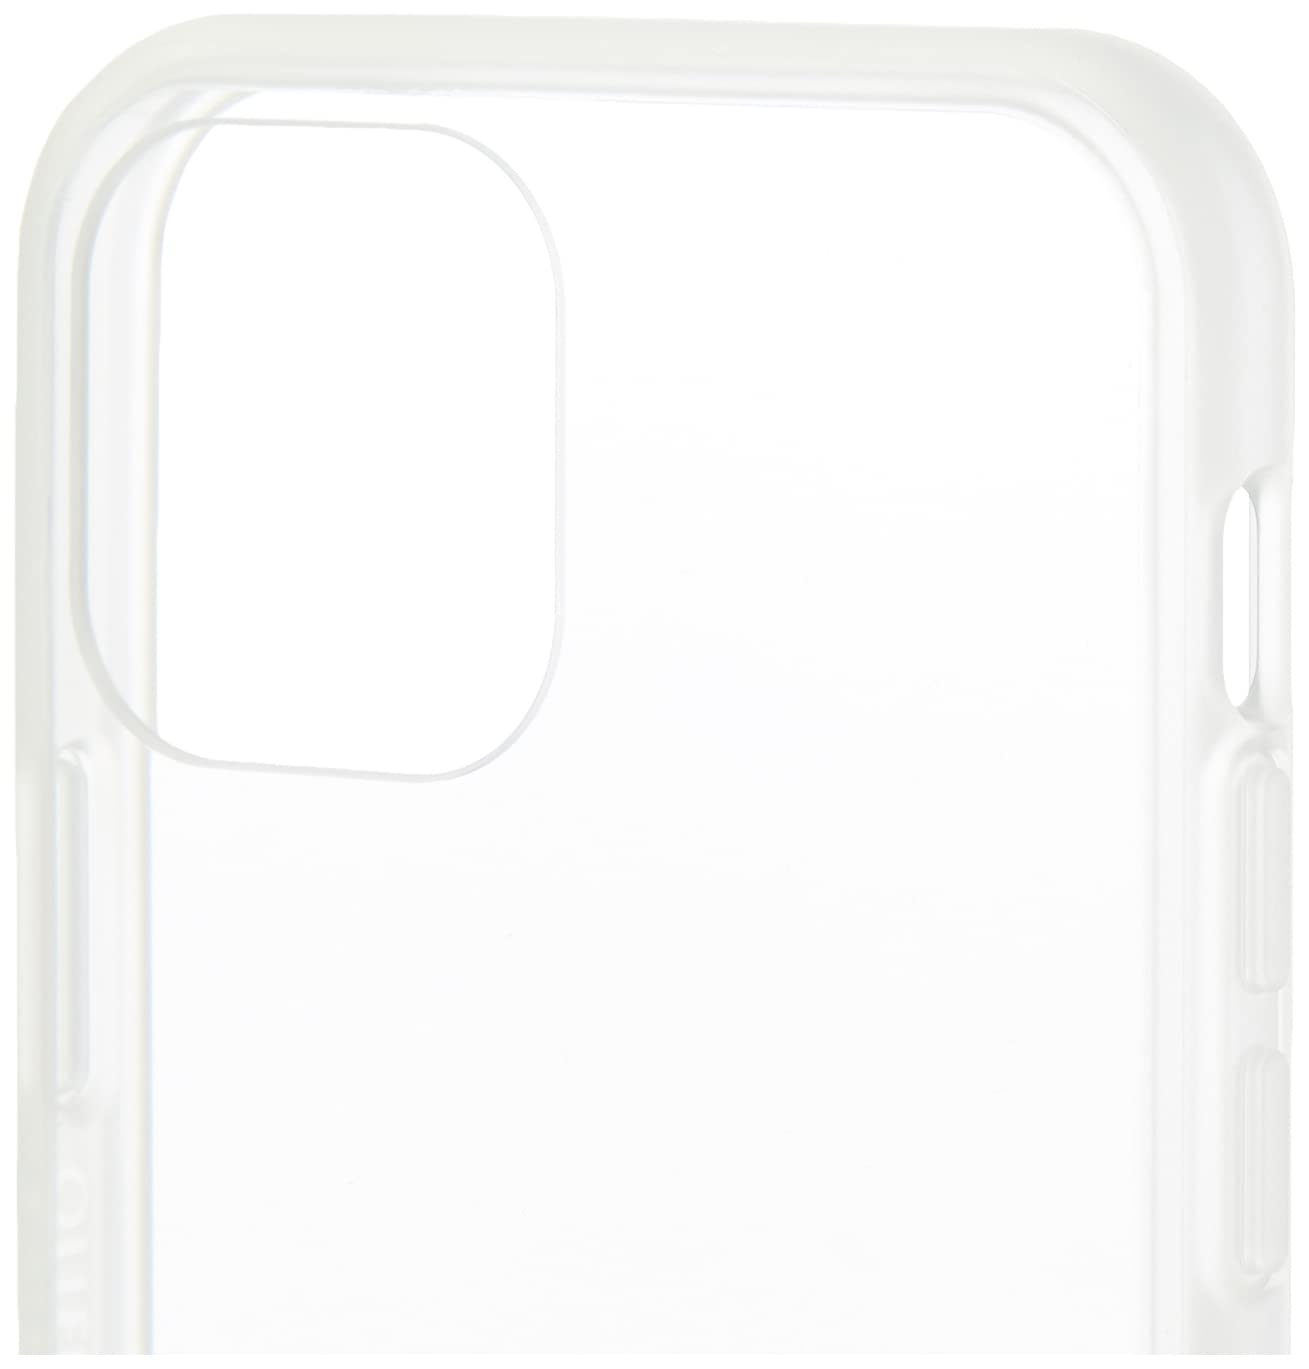 OtterBox IPhone 12 & IPhone 12 Pro Prefix Series Case - CLEAR, Ultra-Thin, Pocket-Friendly, Raised Edges Protect Camera & Screen, Wireless Charging Compatible